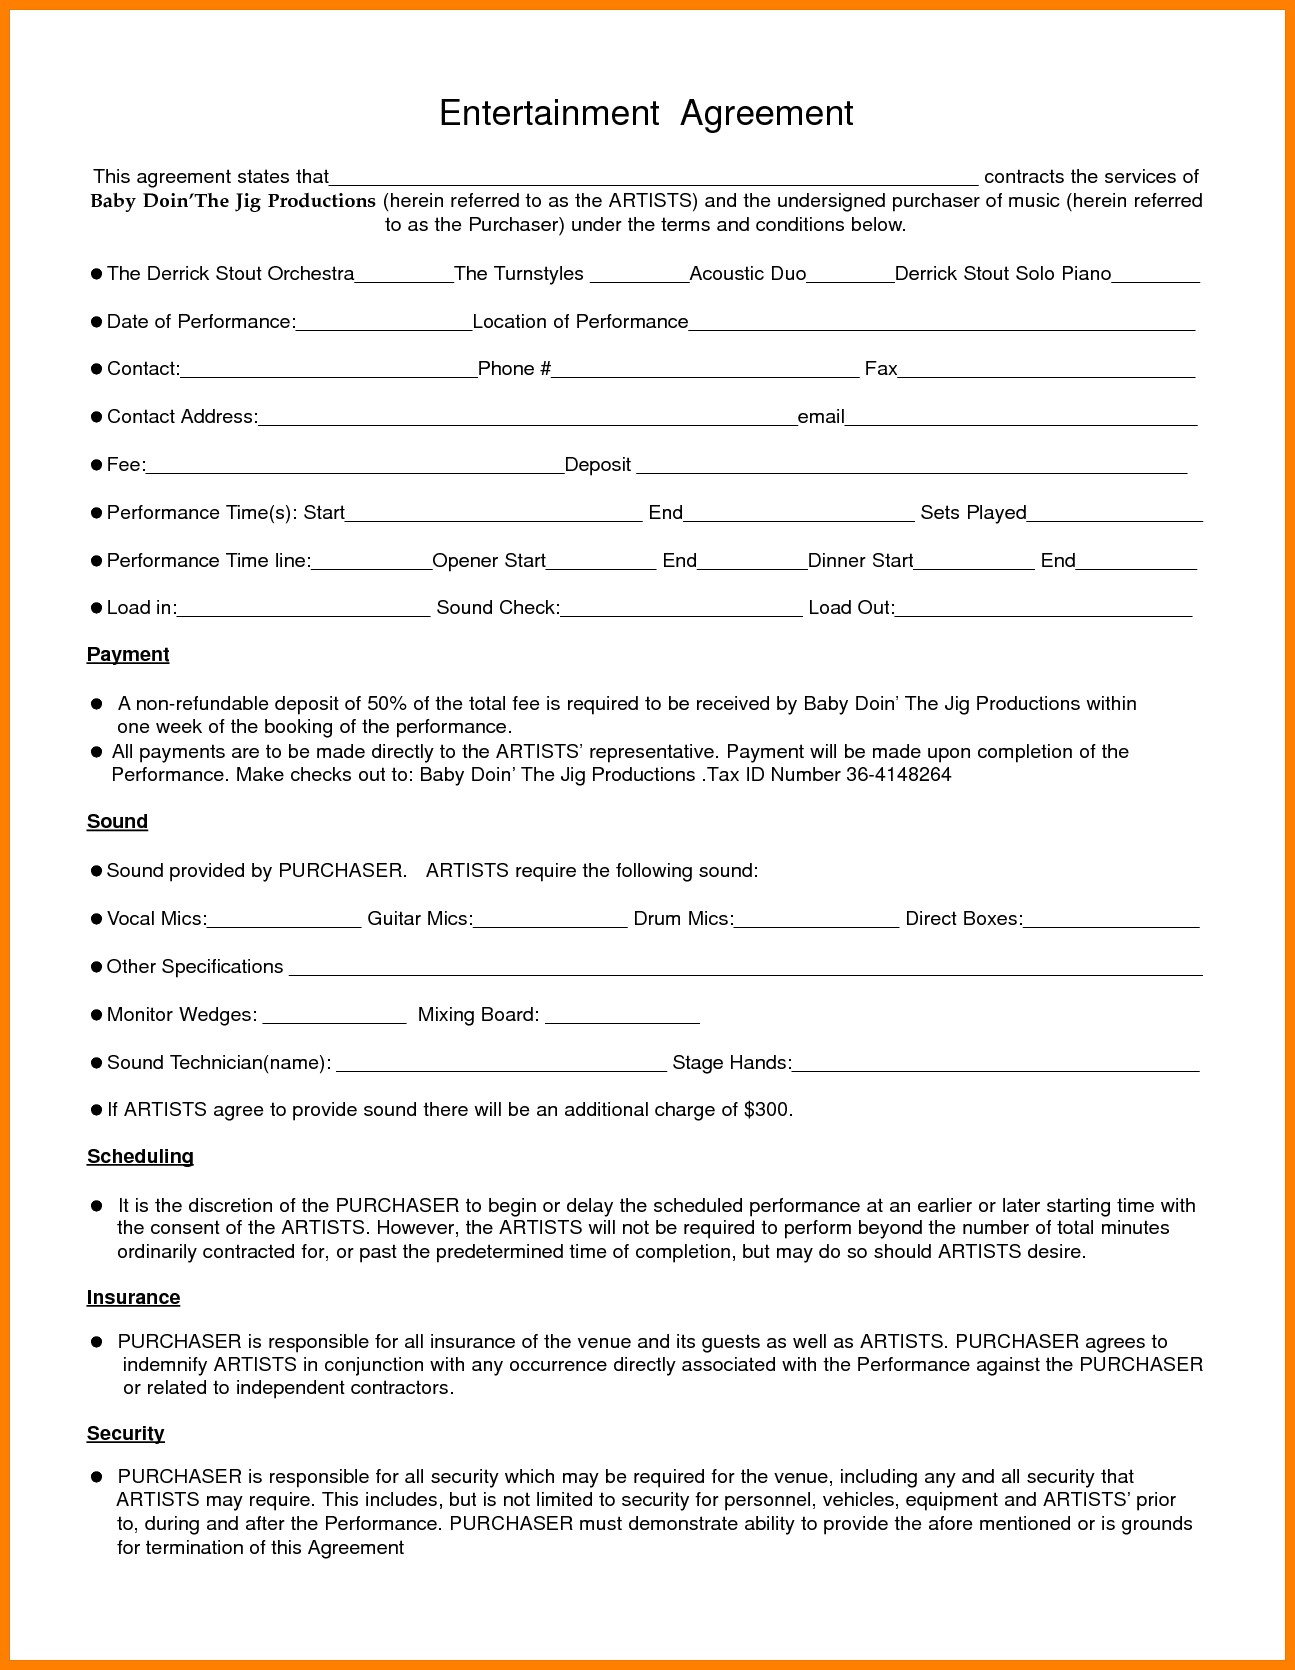 6 Entertainment Contract Sample Business Opportunity Program Document Templates